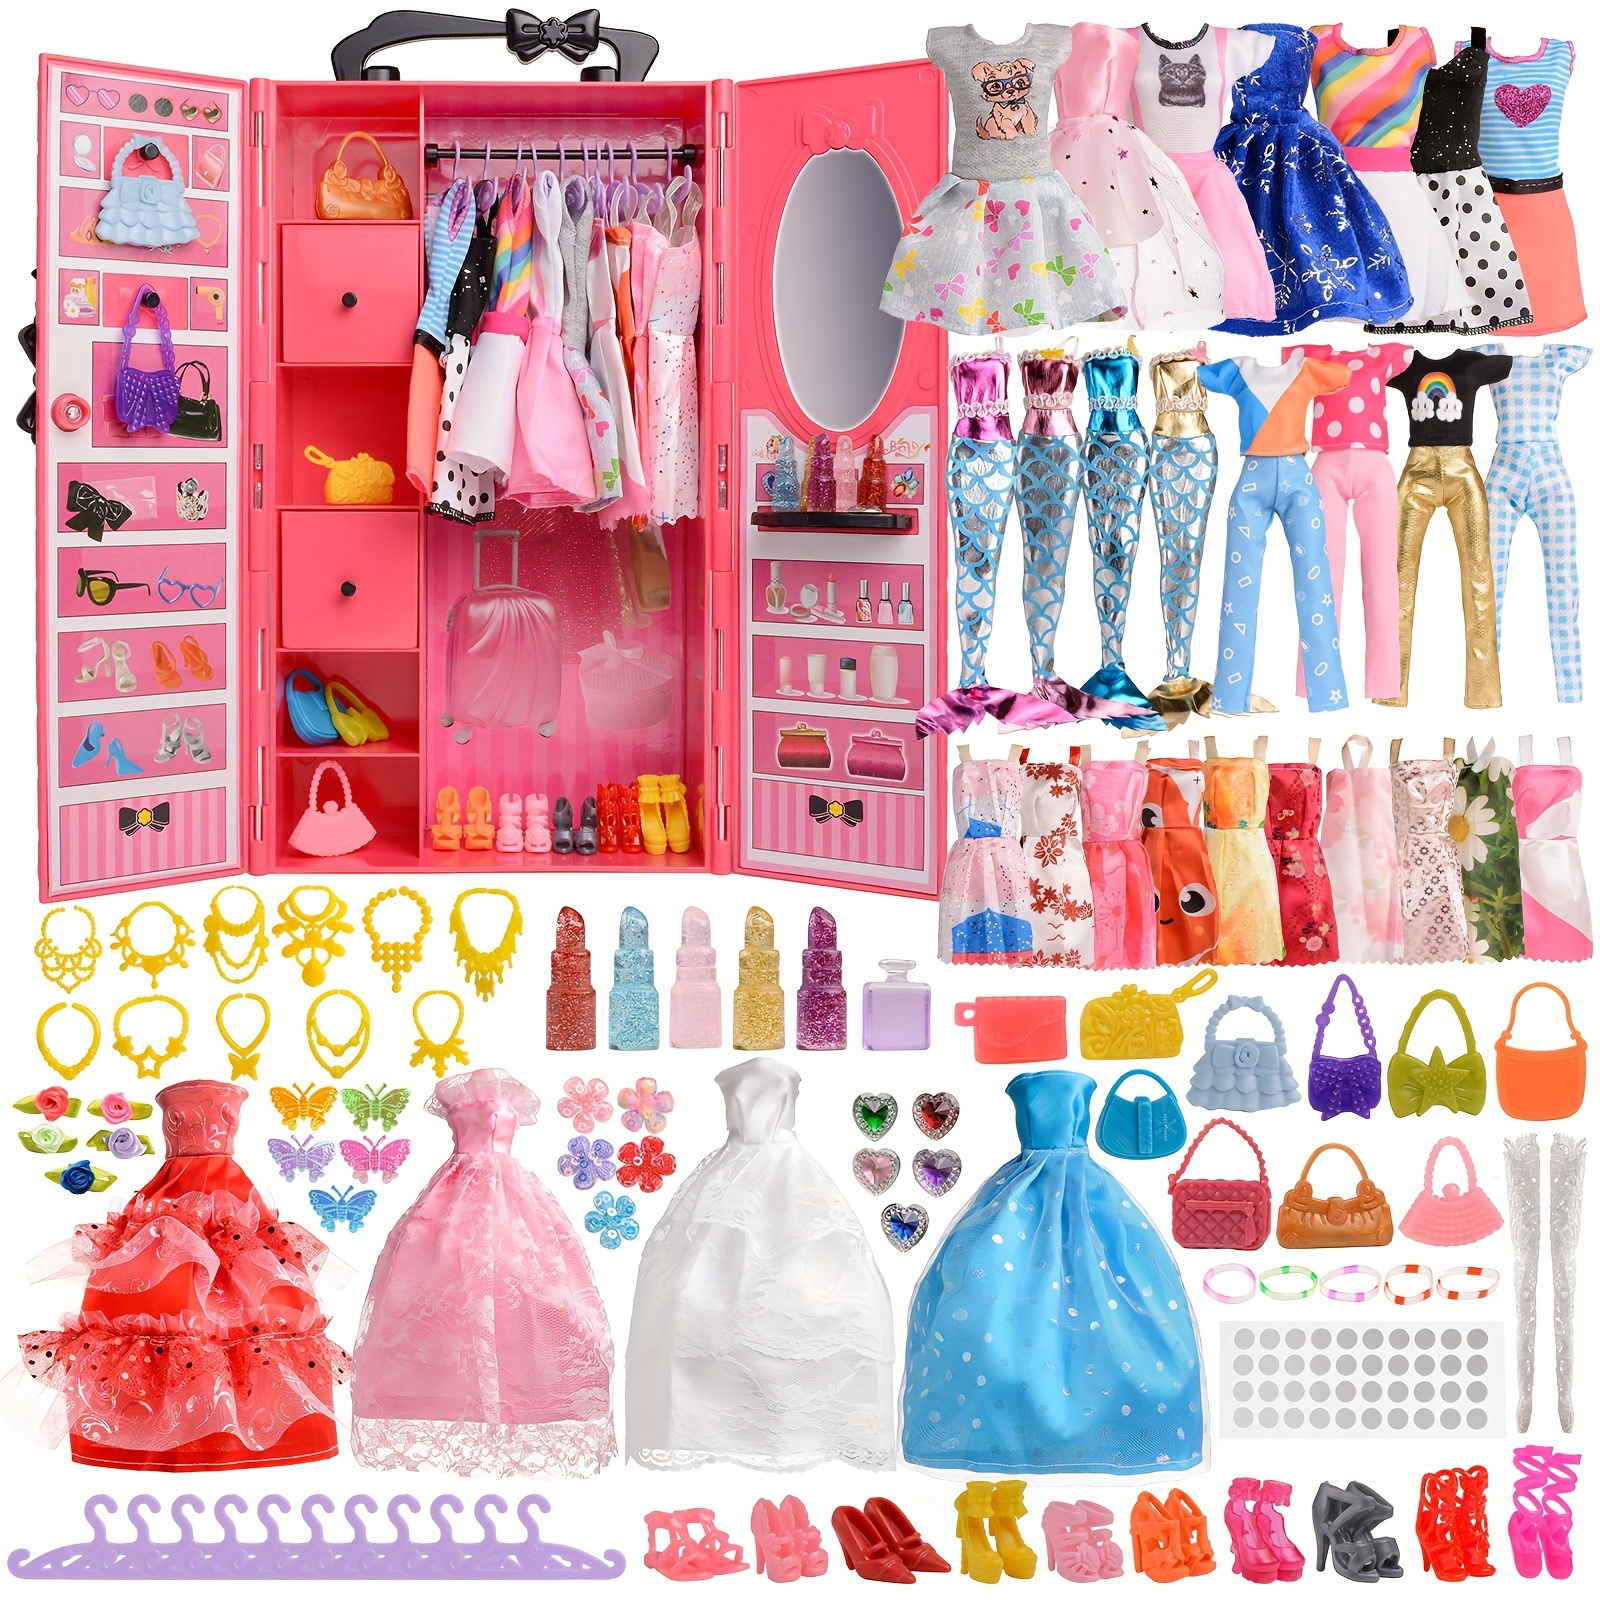 

87pack Doll And Closet Set Fashion Diy Wardrobe Doll Clothes And Accessories Including Wardrobe, Wedding Dress, Shoes, Necklace, Bags And More